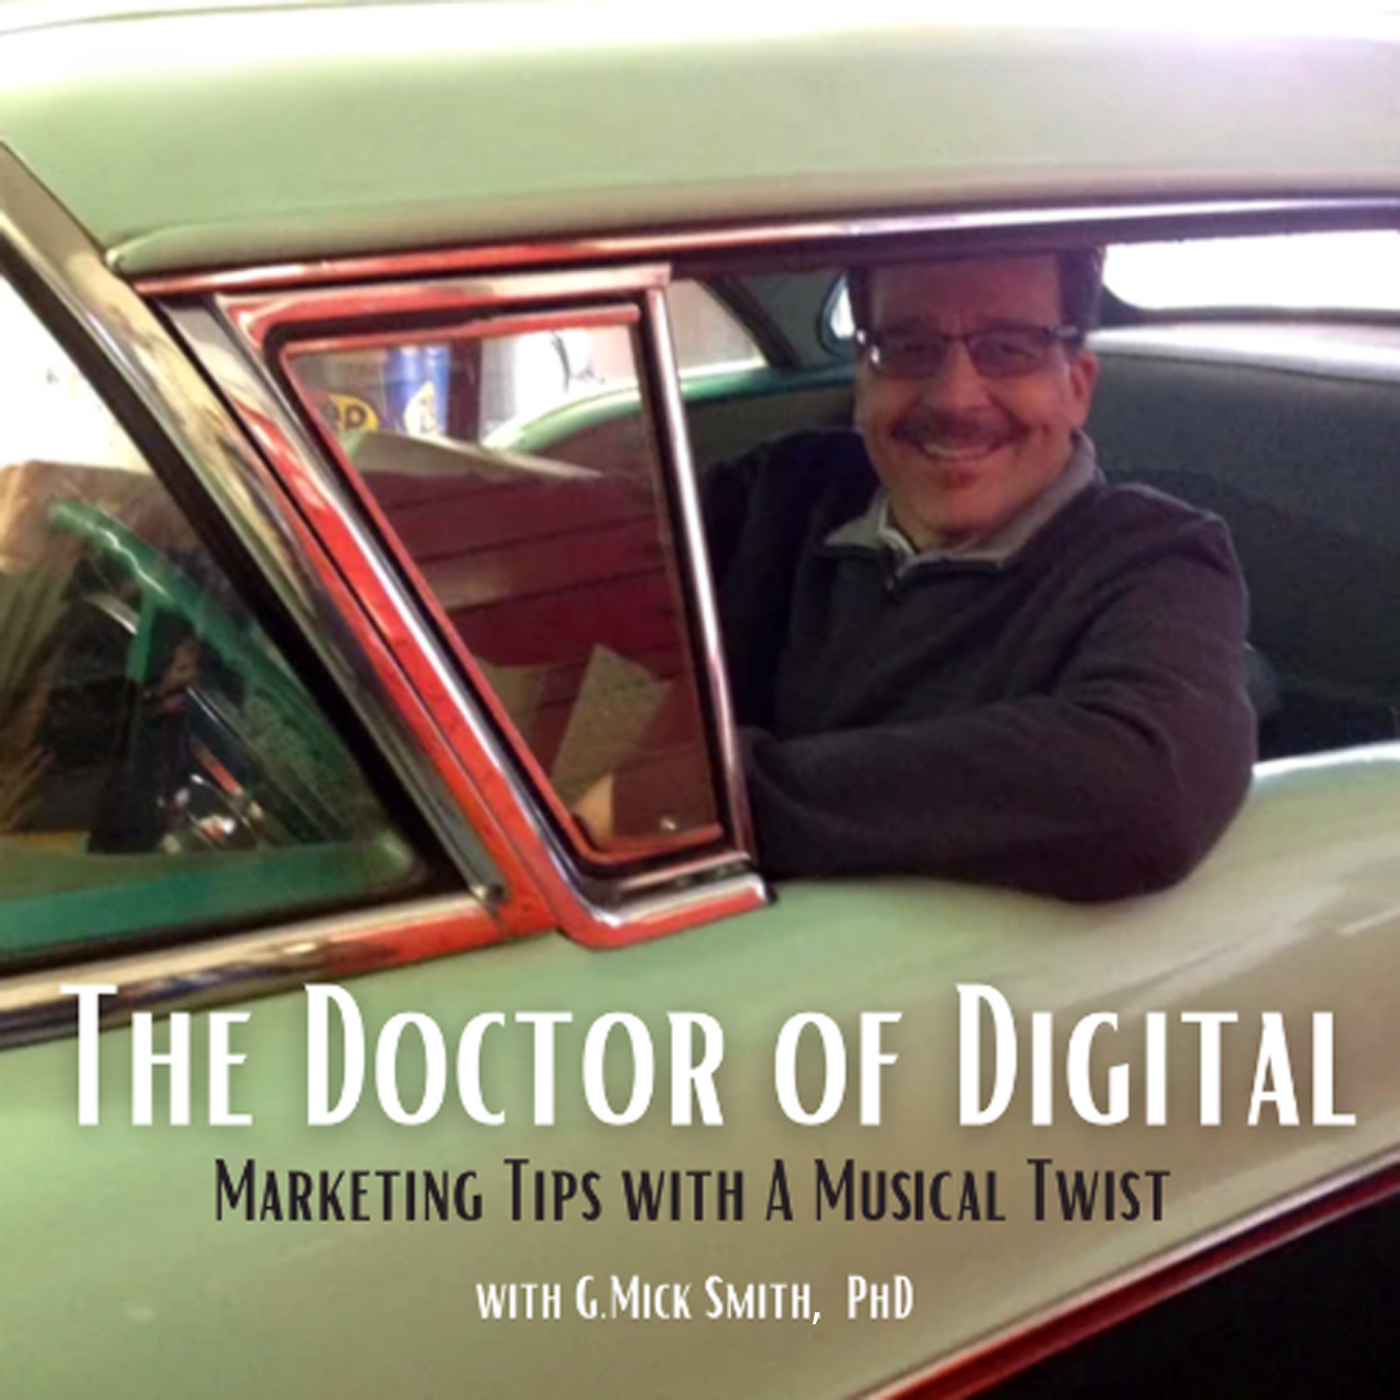 The Doctor of Digital